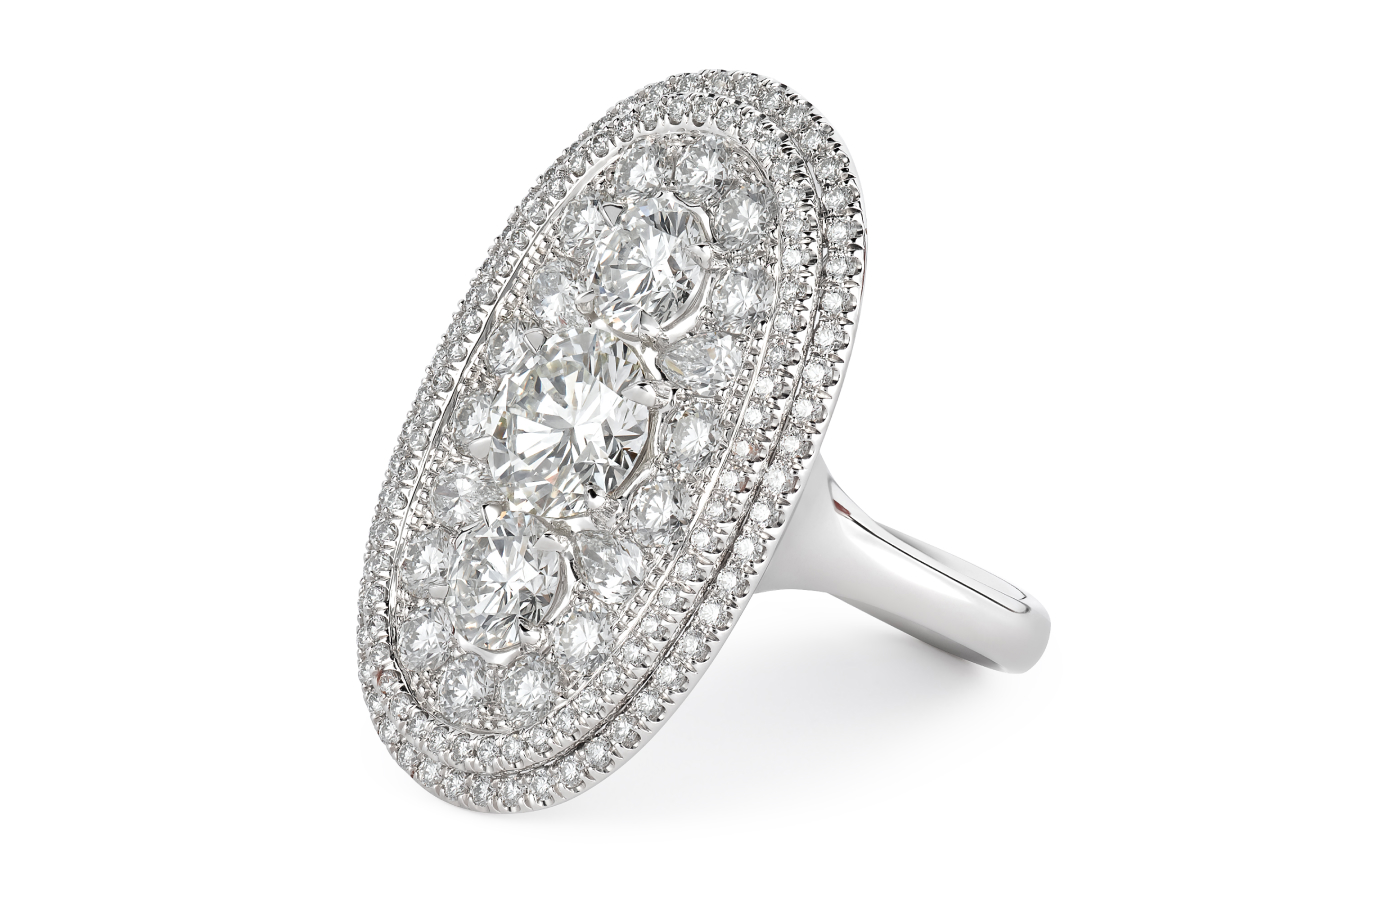 D. Gregory ring in platinum and diamond